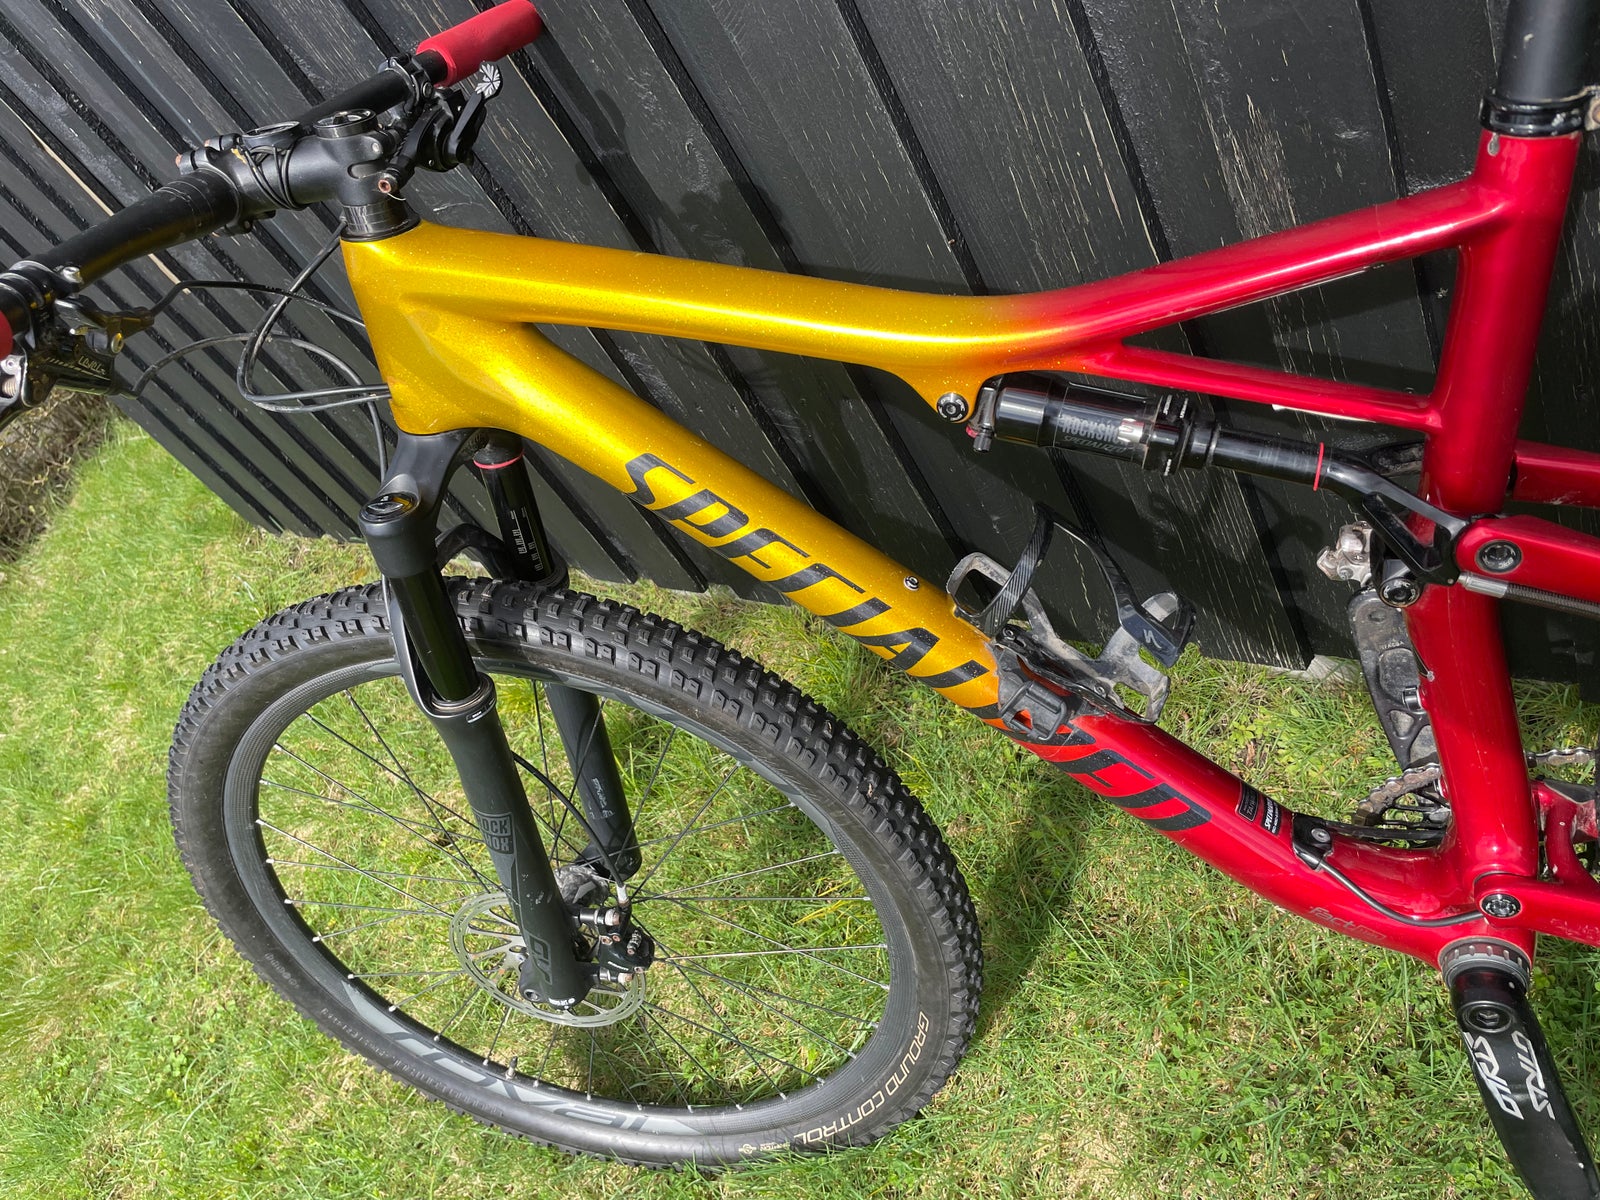 Specialized Epic Expert, full suspension, L tommer